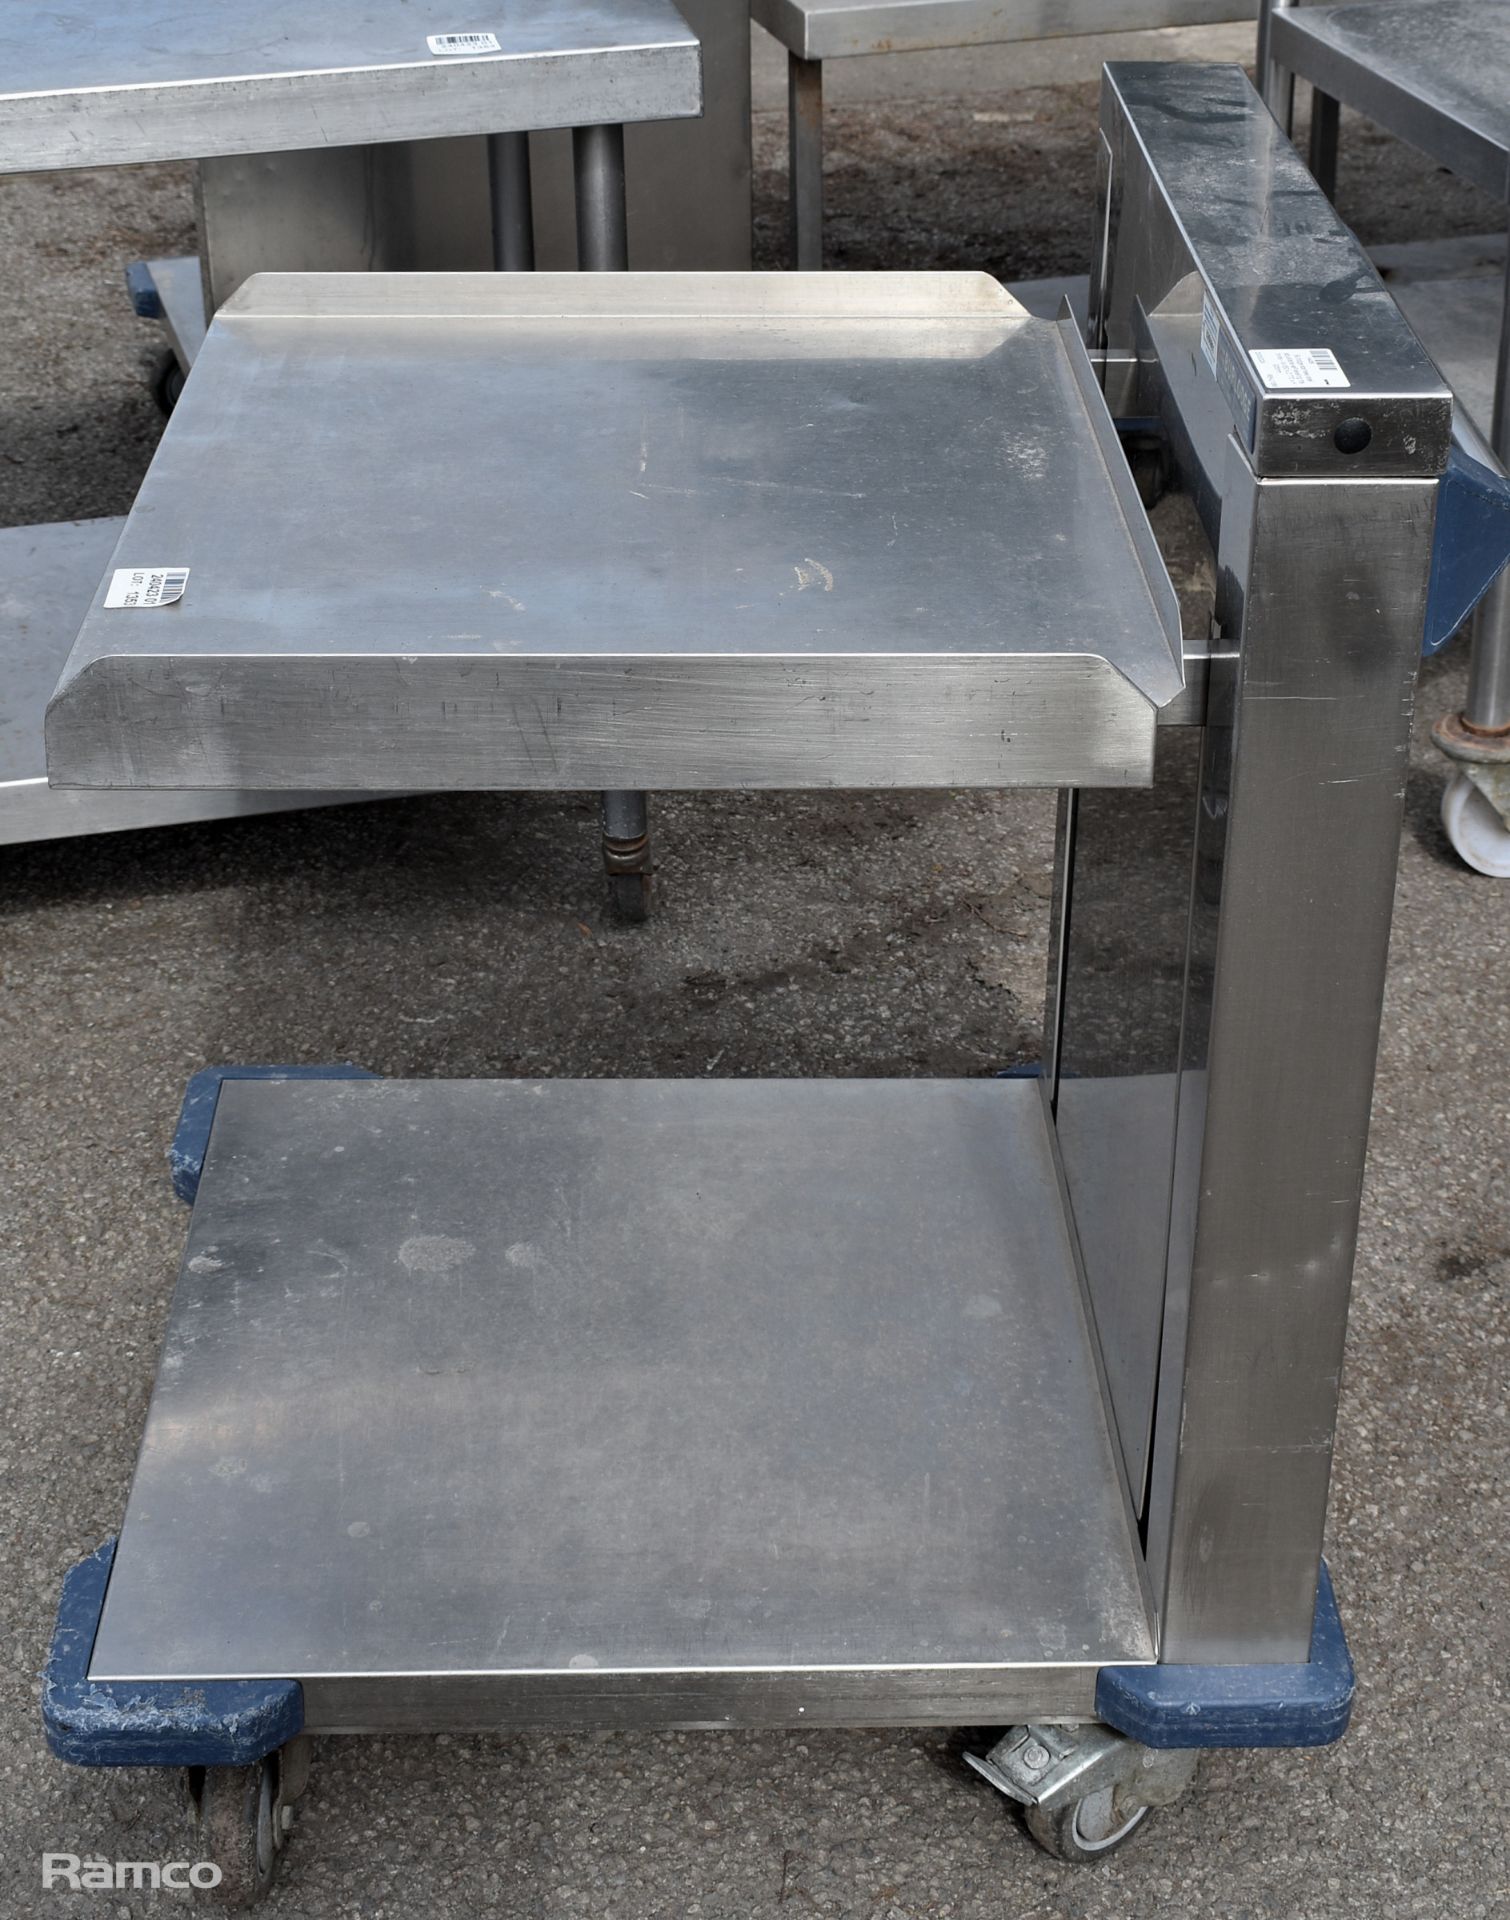 Burlodge stainless steel adjustable self-levelling tray trolley - W 650 x D 770 x H 935mm - Image 4 of 4